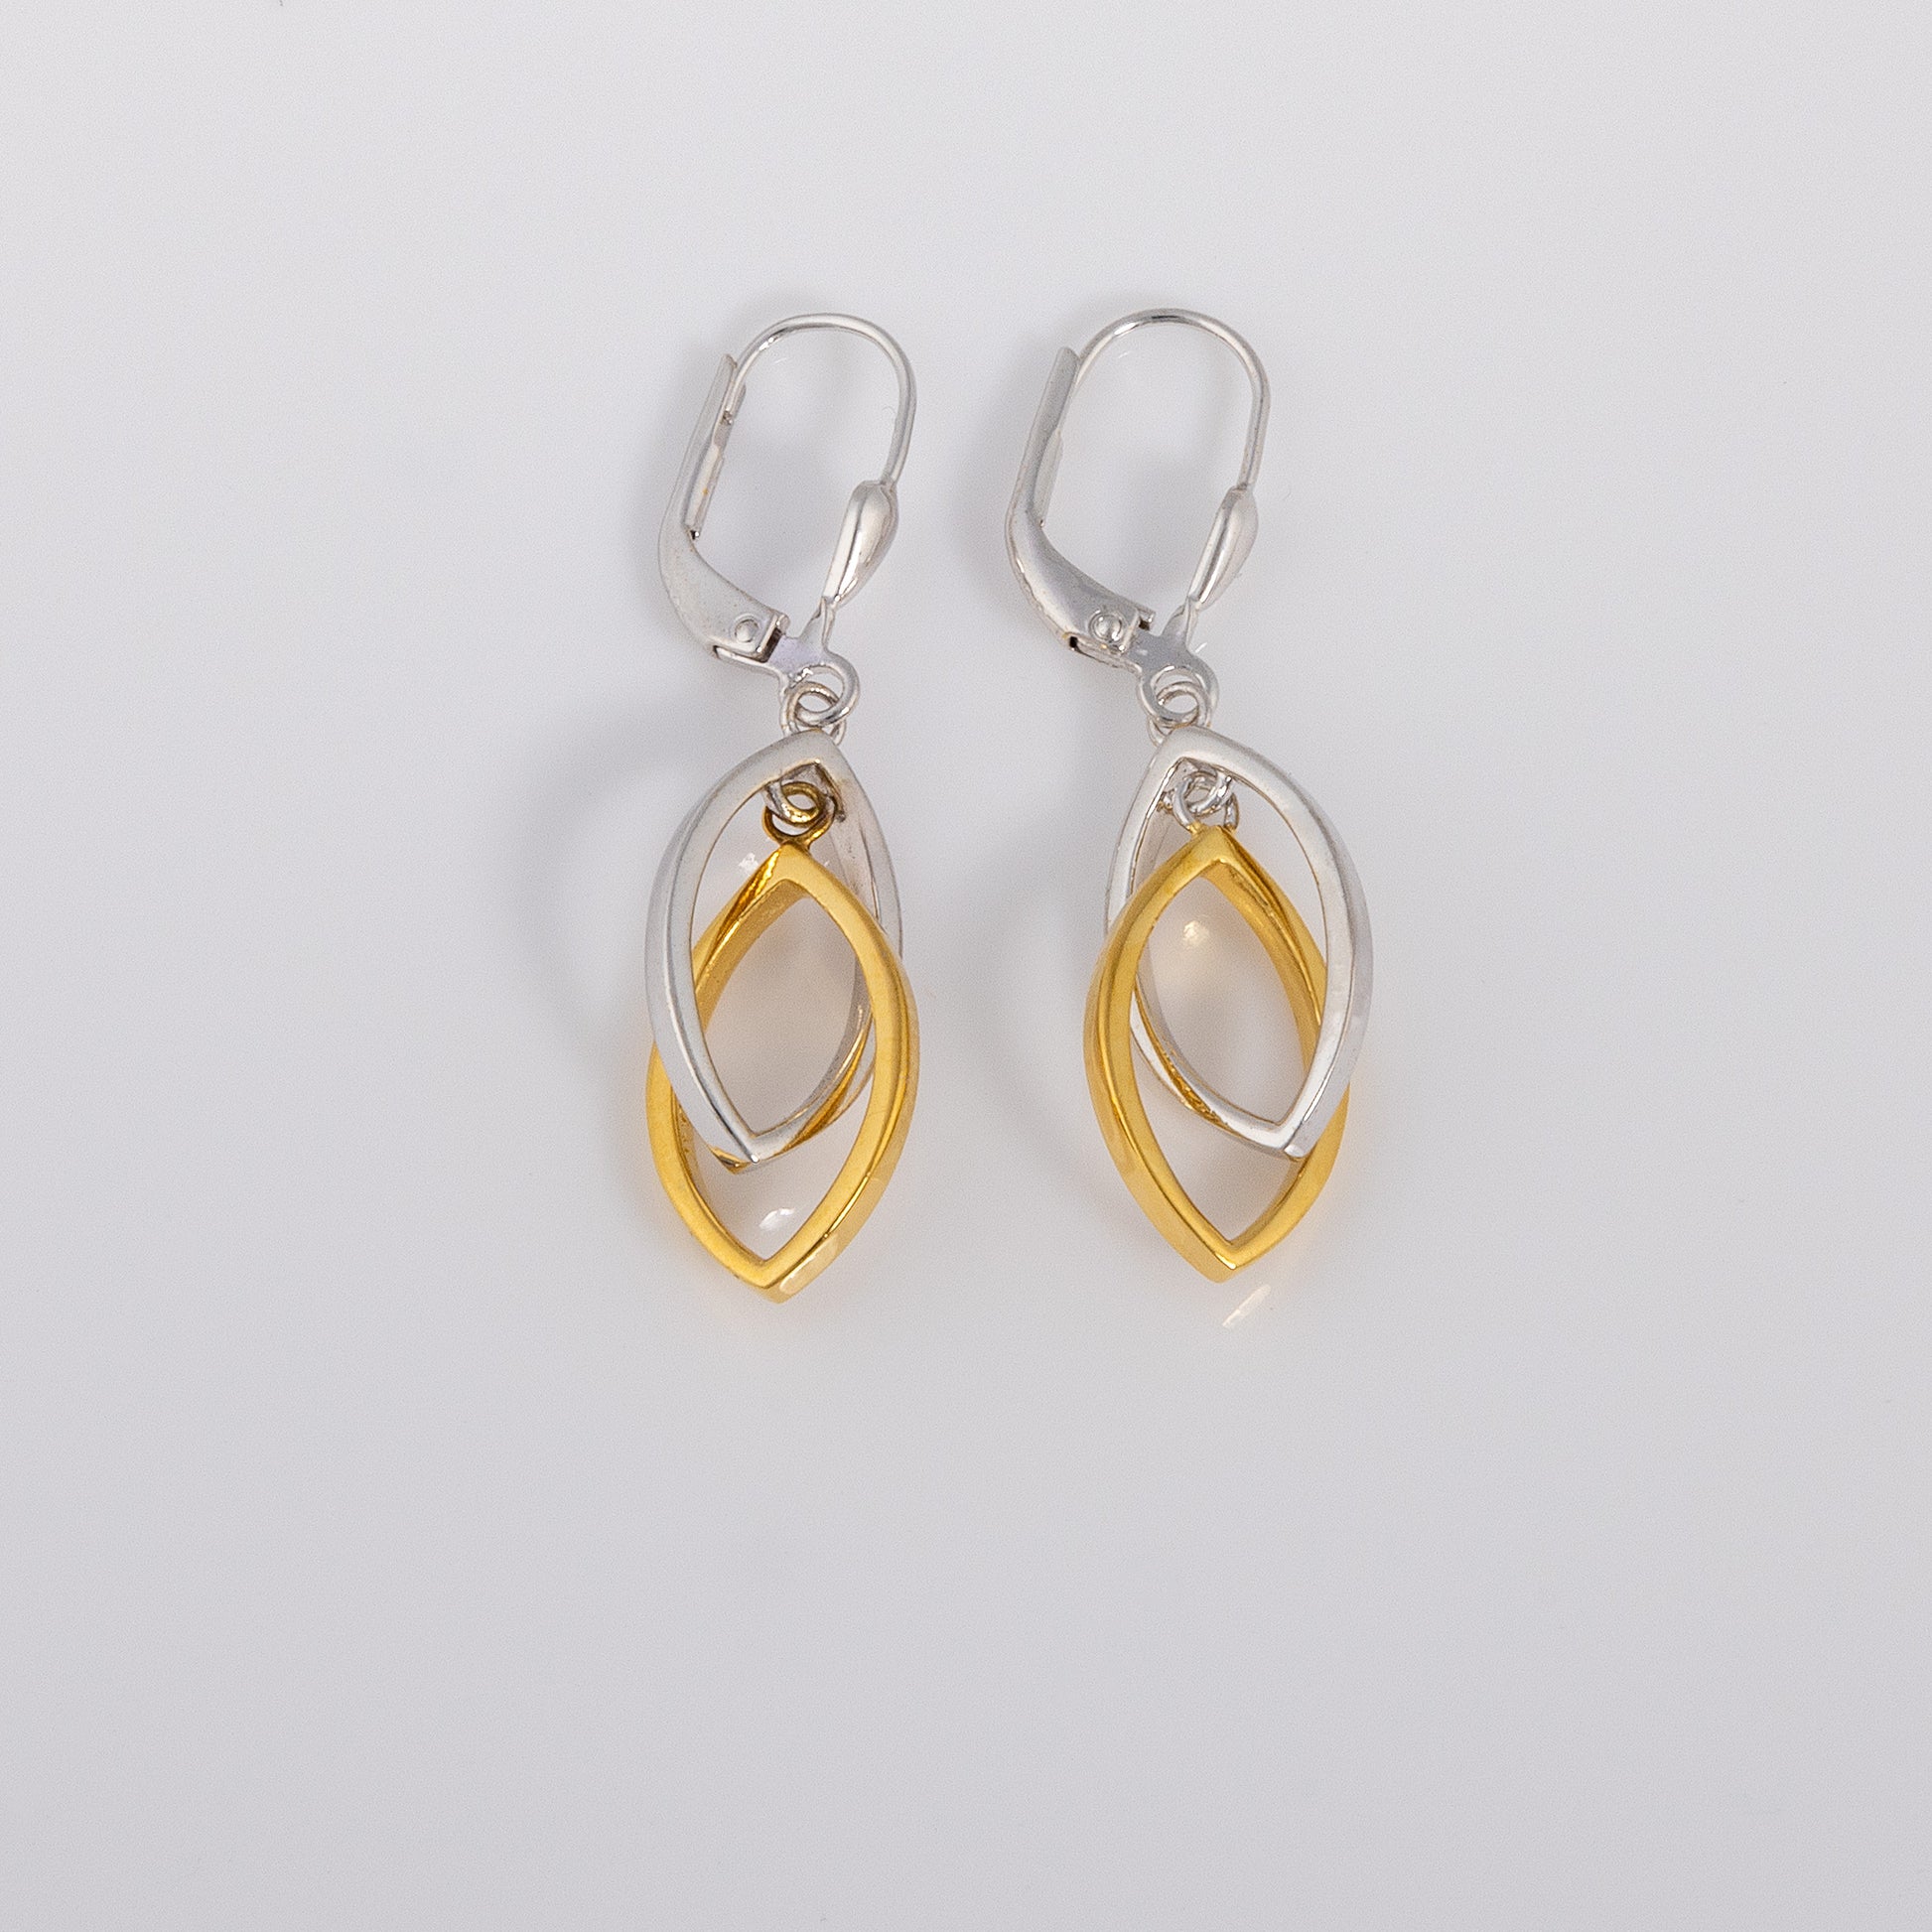 Silver Rhodium and Gold Vermeil Lever Back Earrings with Two Intertwining Shapes